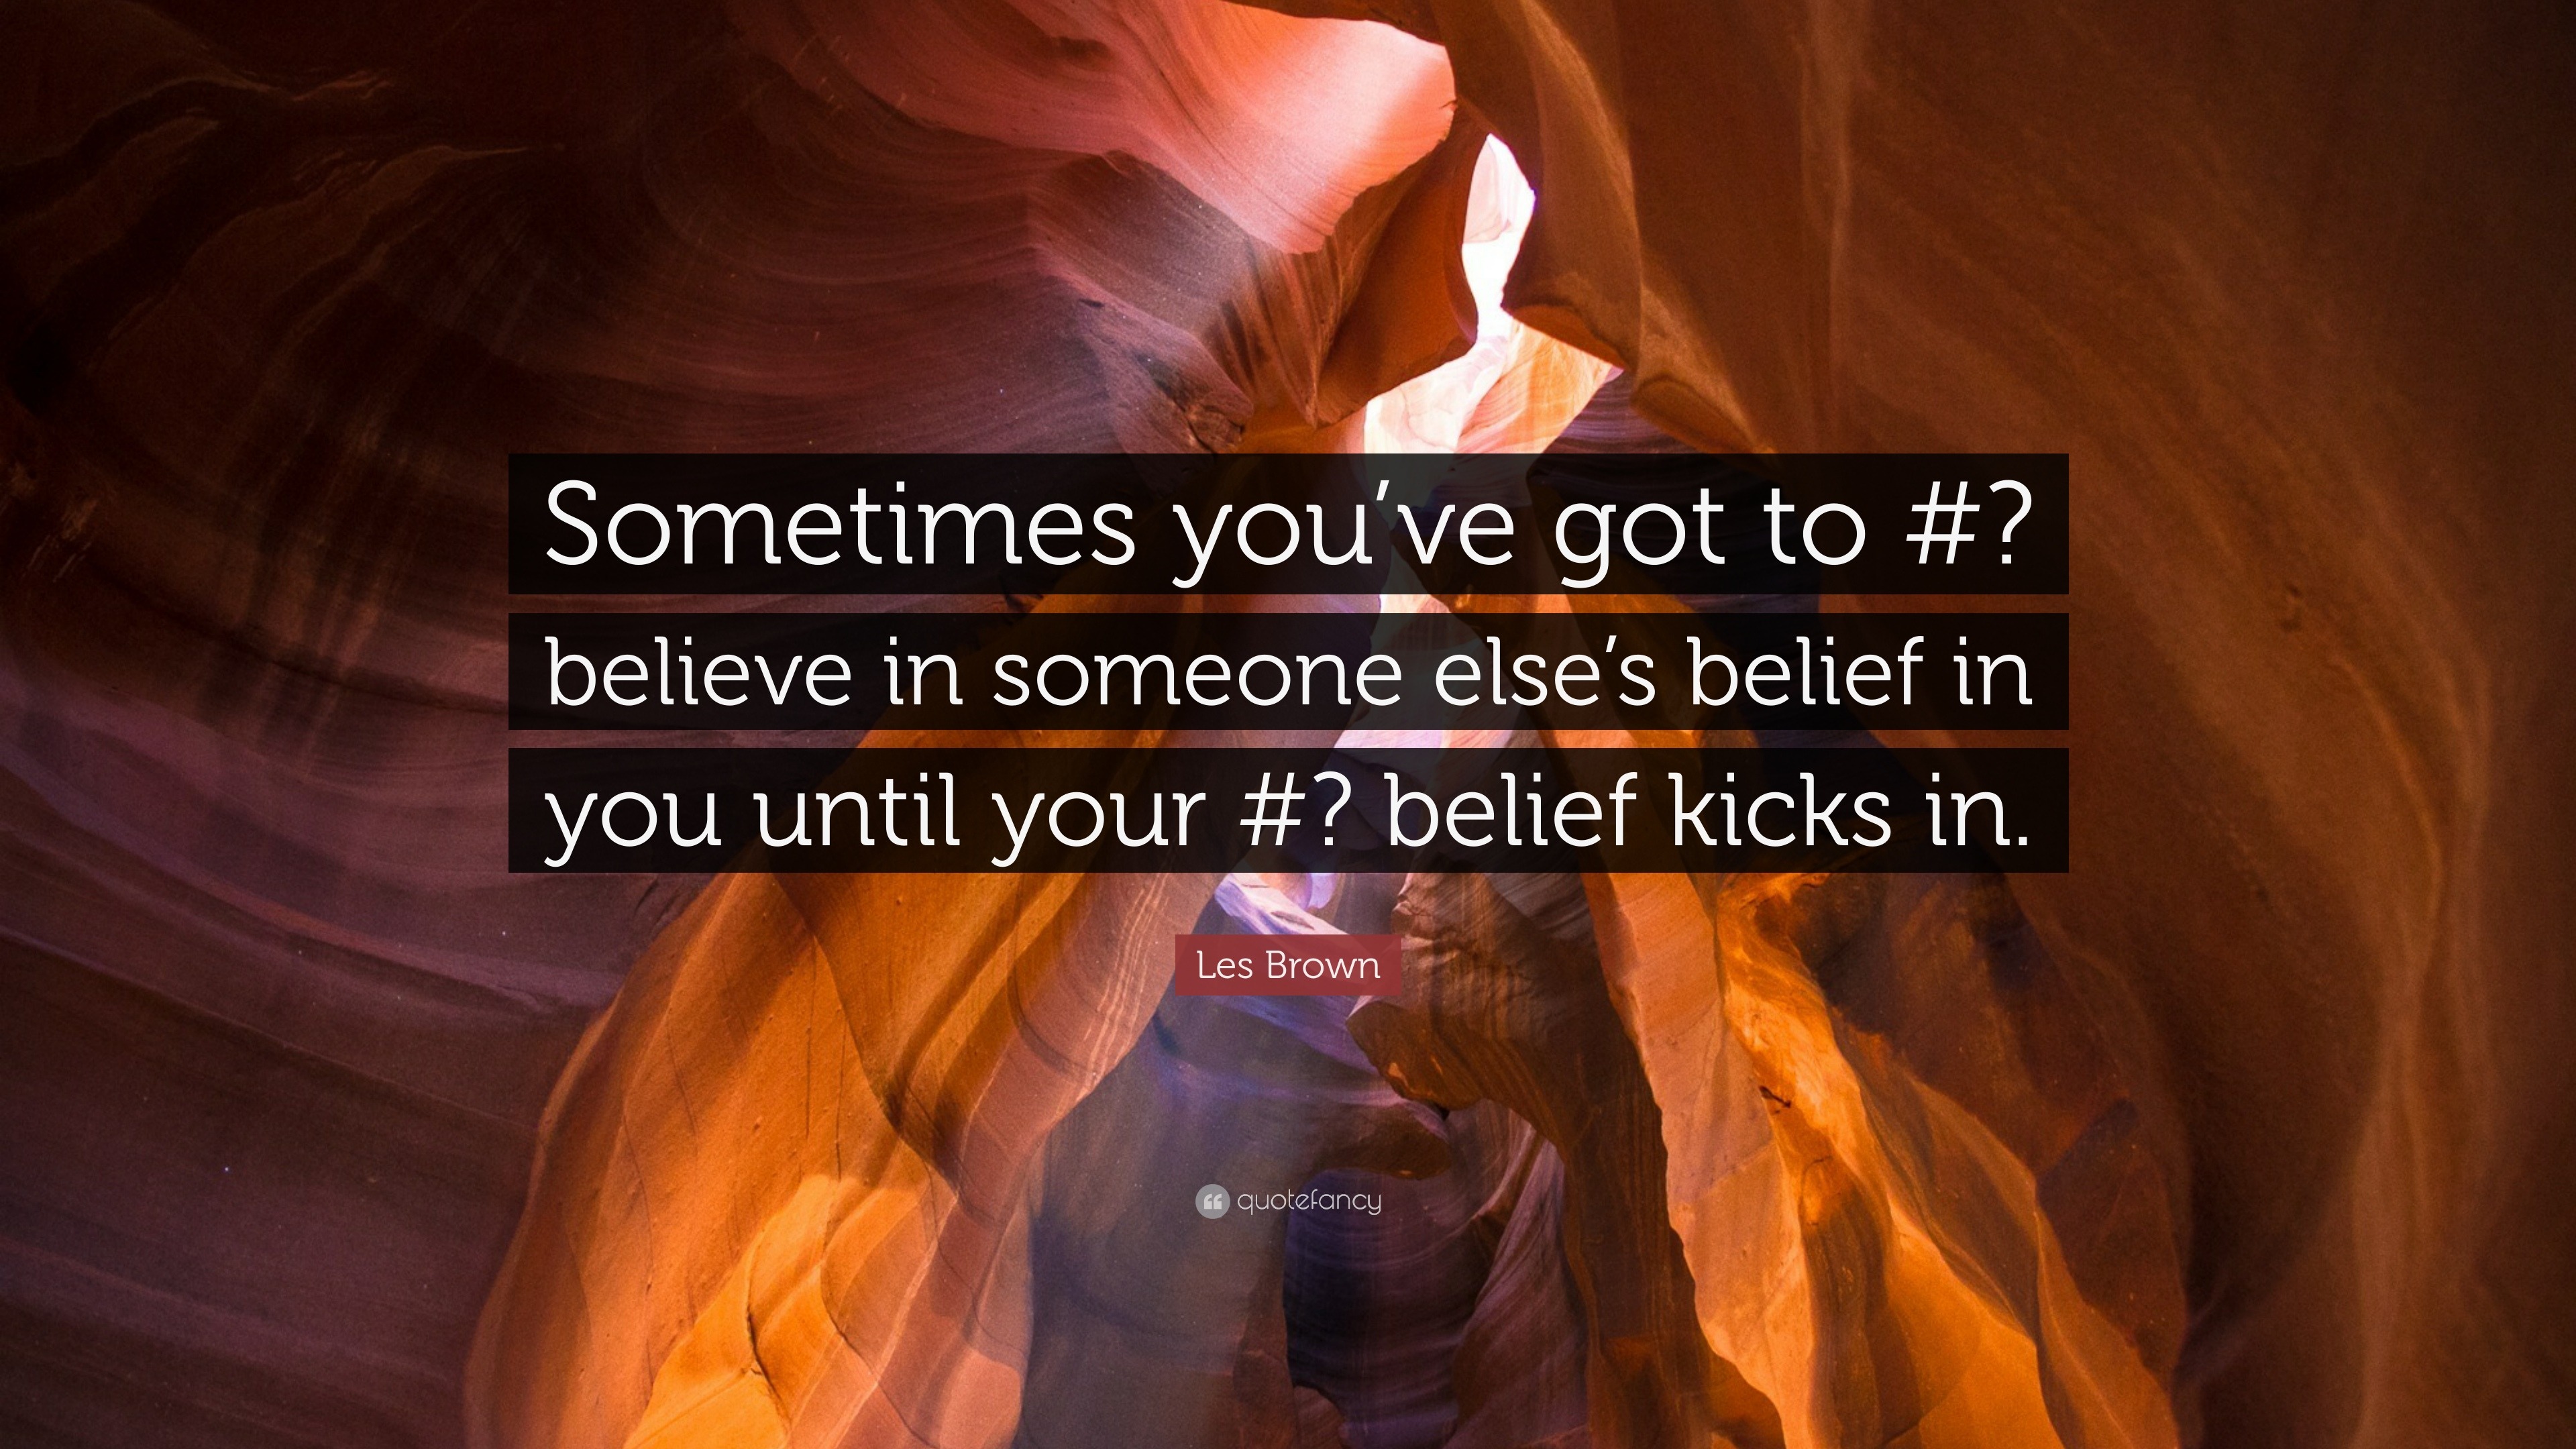 Les Brown Quote “Sometimes you’ve got to ? believe in